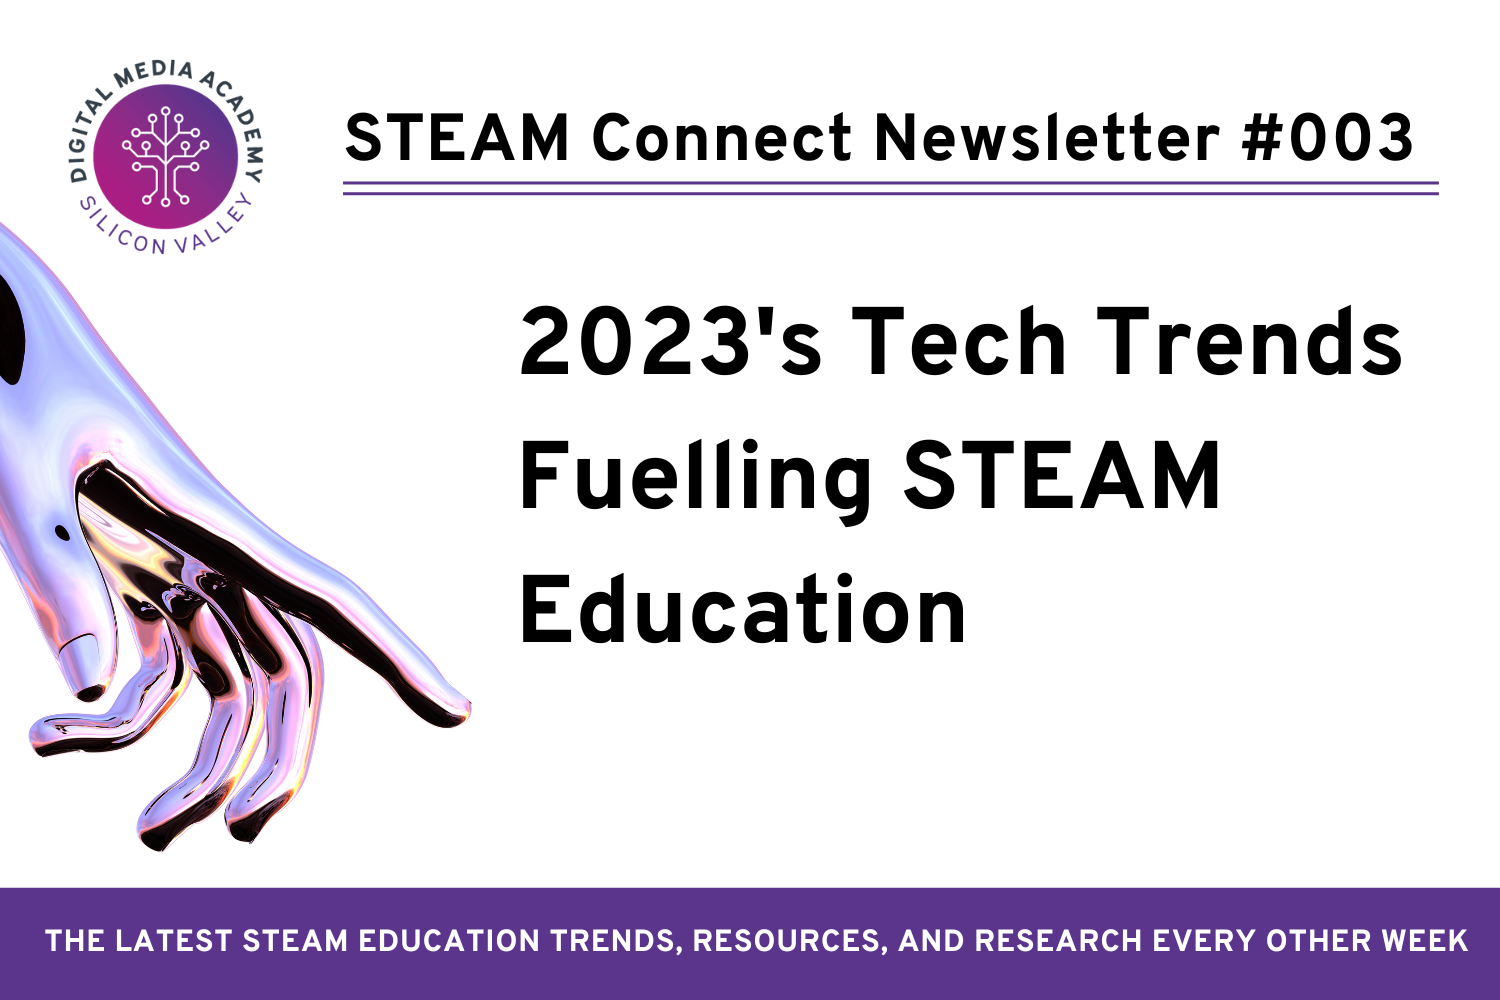 STEAM Connect 003 - 2023's Tech Trends Fuelling STEAM Education